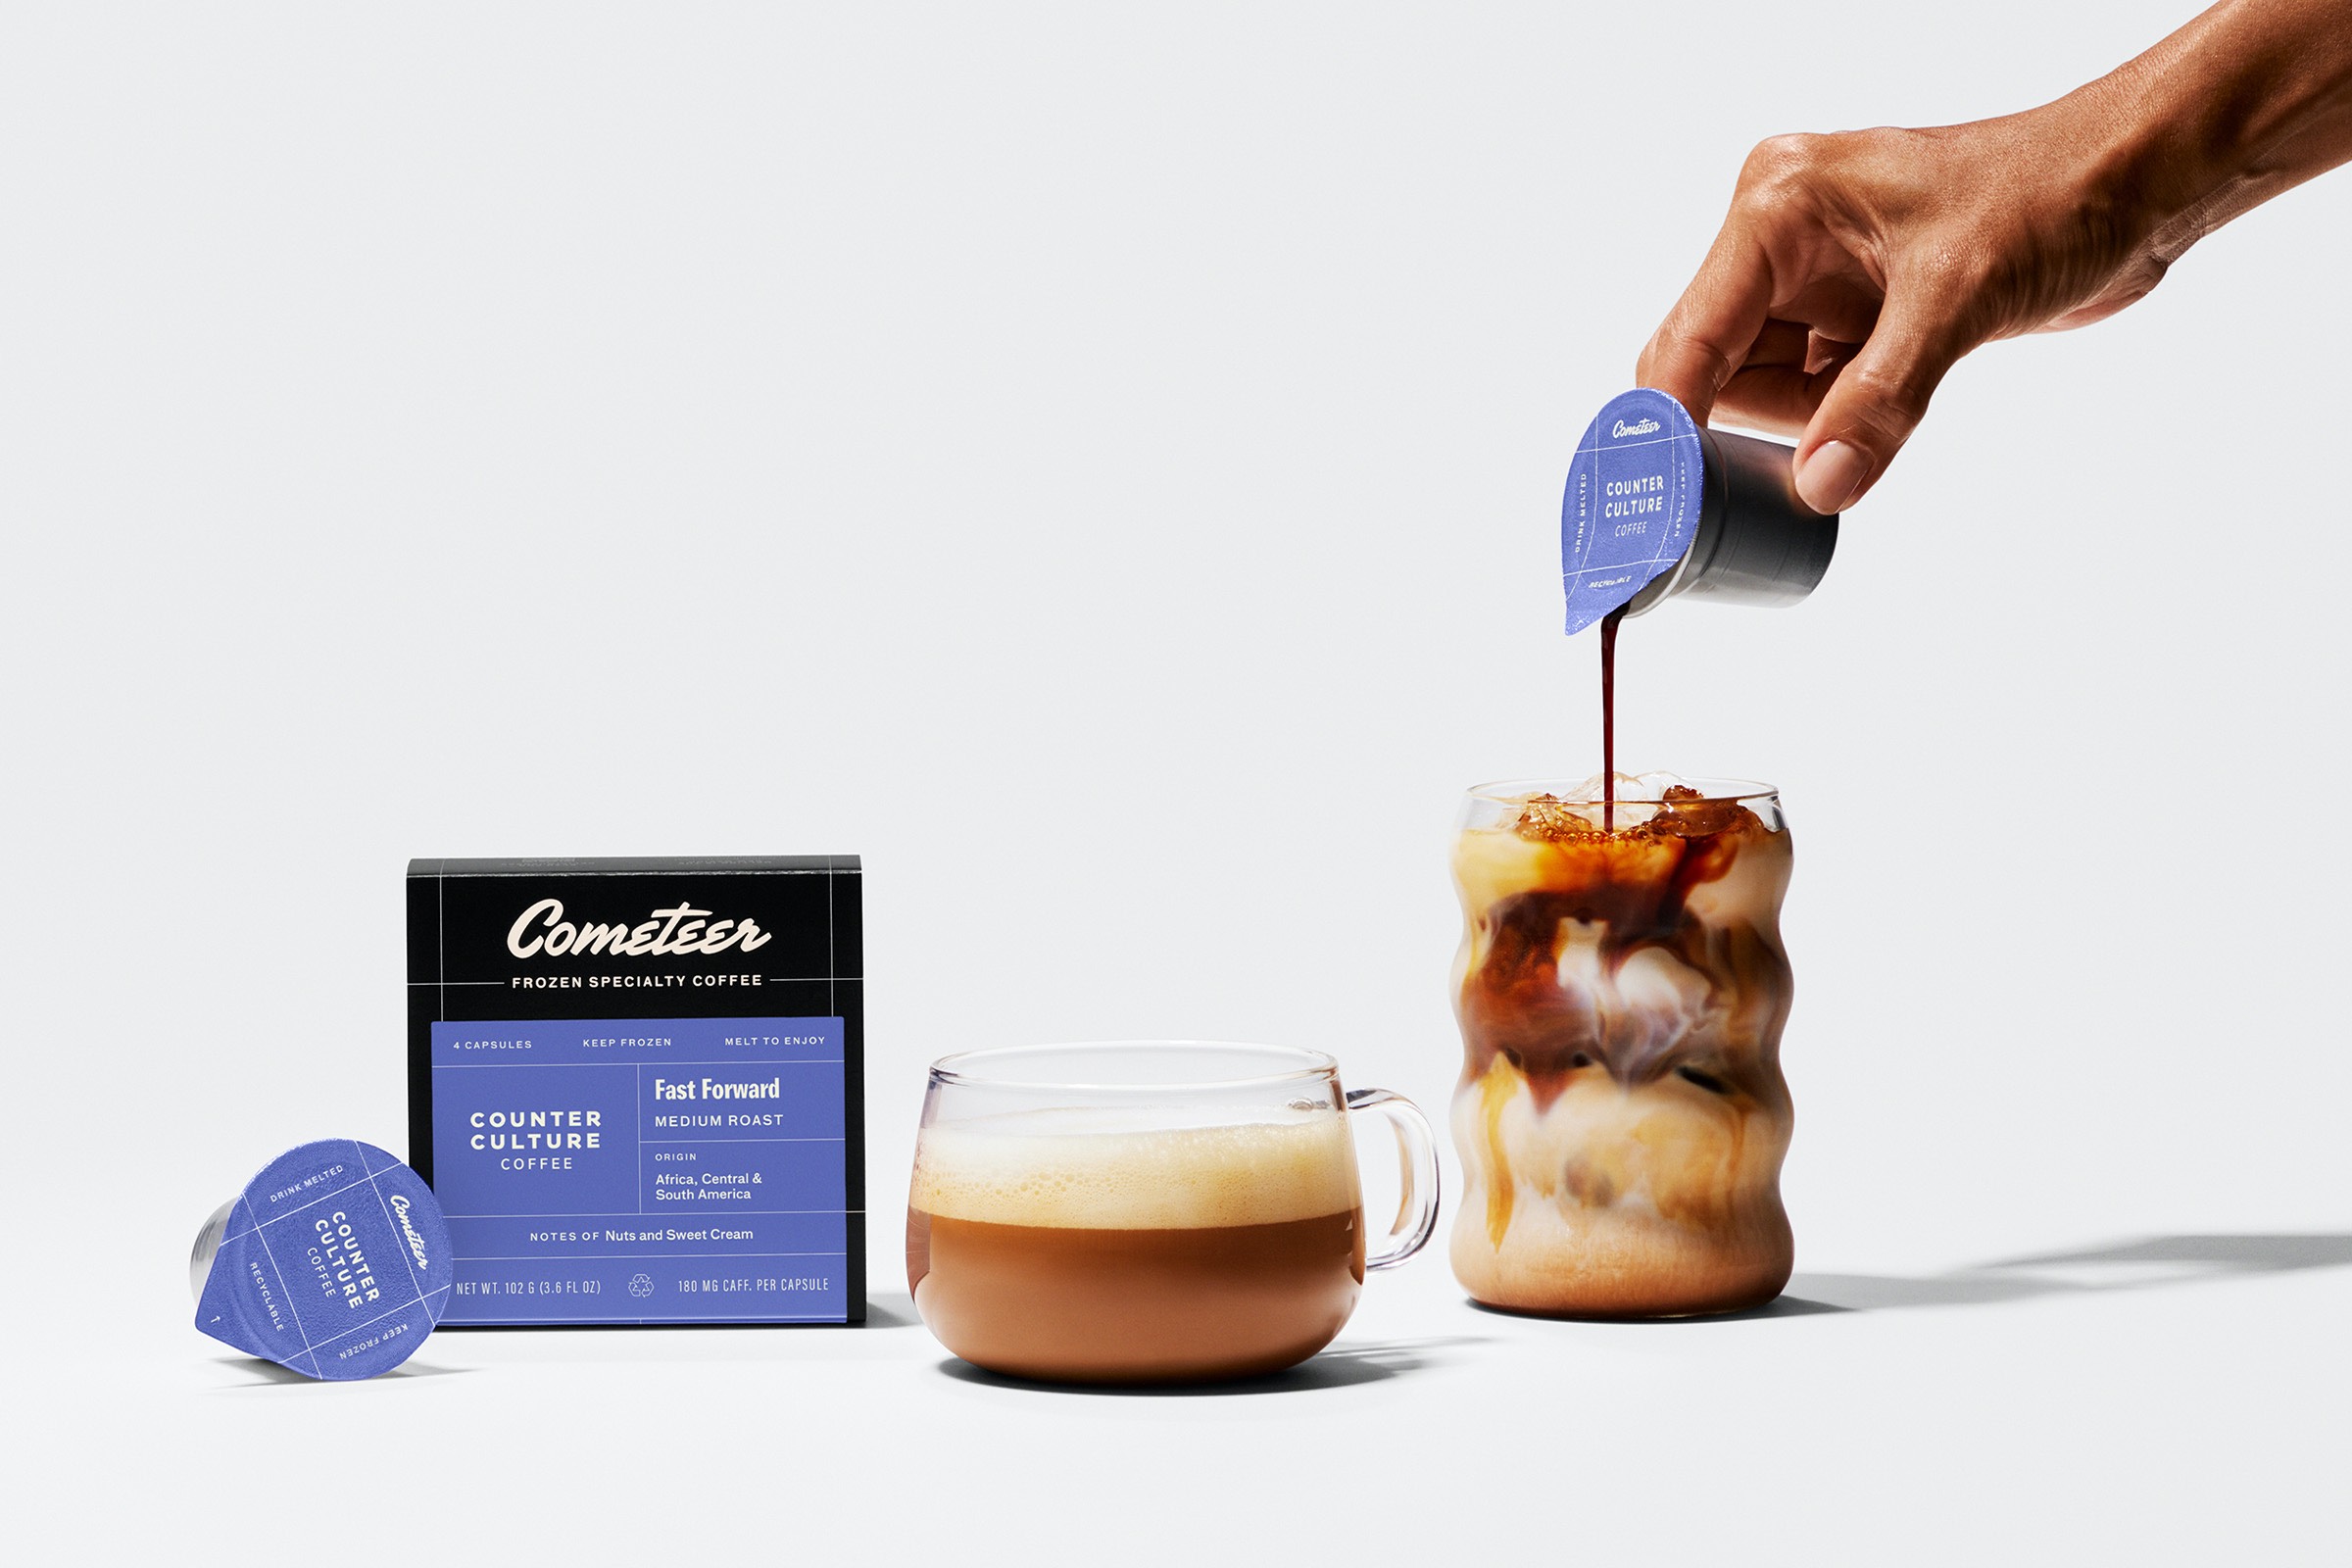 Cometeer Coffee Pods - Counter Culture Fast Forward, Medium Roast Delivery  & Pickup